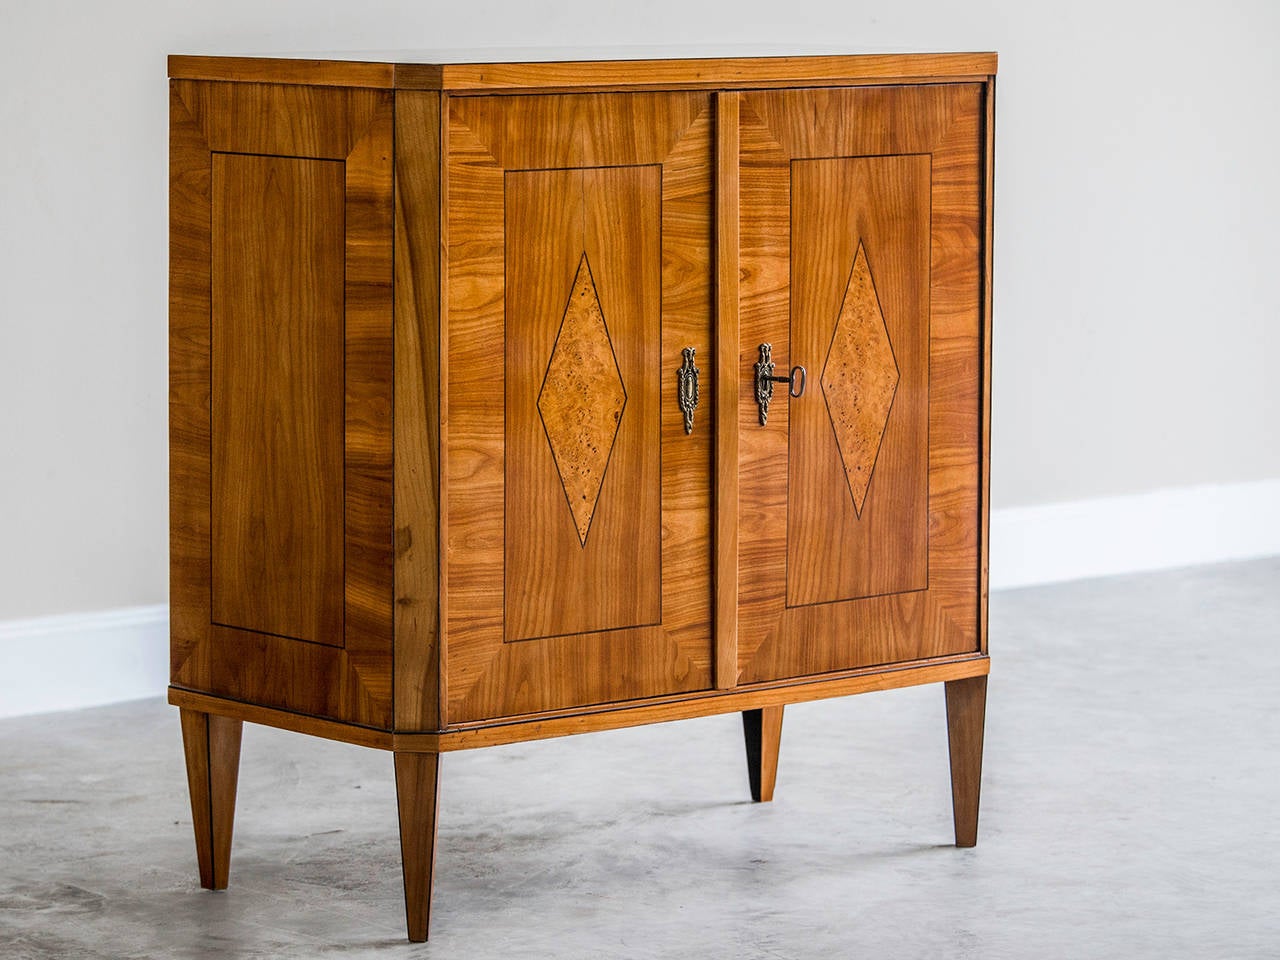 Biedermeier period cherrywood inlaid buffet or cabinet, Vienna, Austria, circa 1820. This two door cabinet possesses a powerful visual impact despite its diminutive scale. The balanced and symmetrical arrangement of the design takes advantage of the